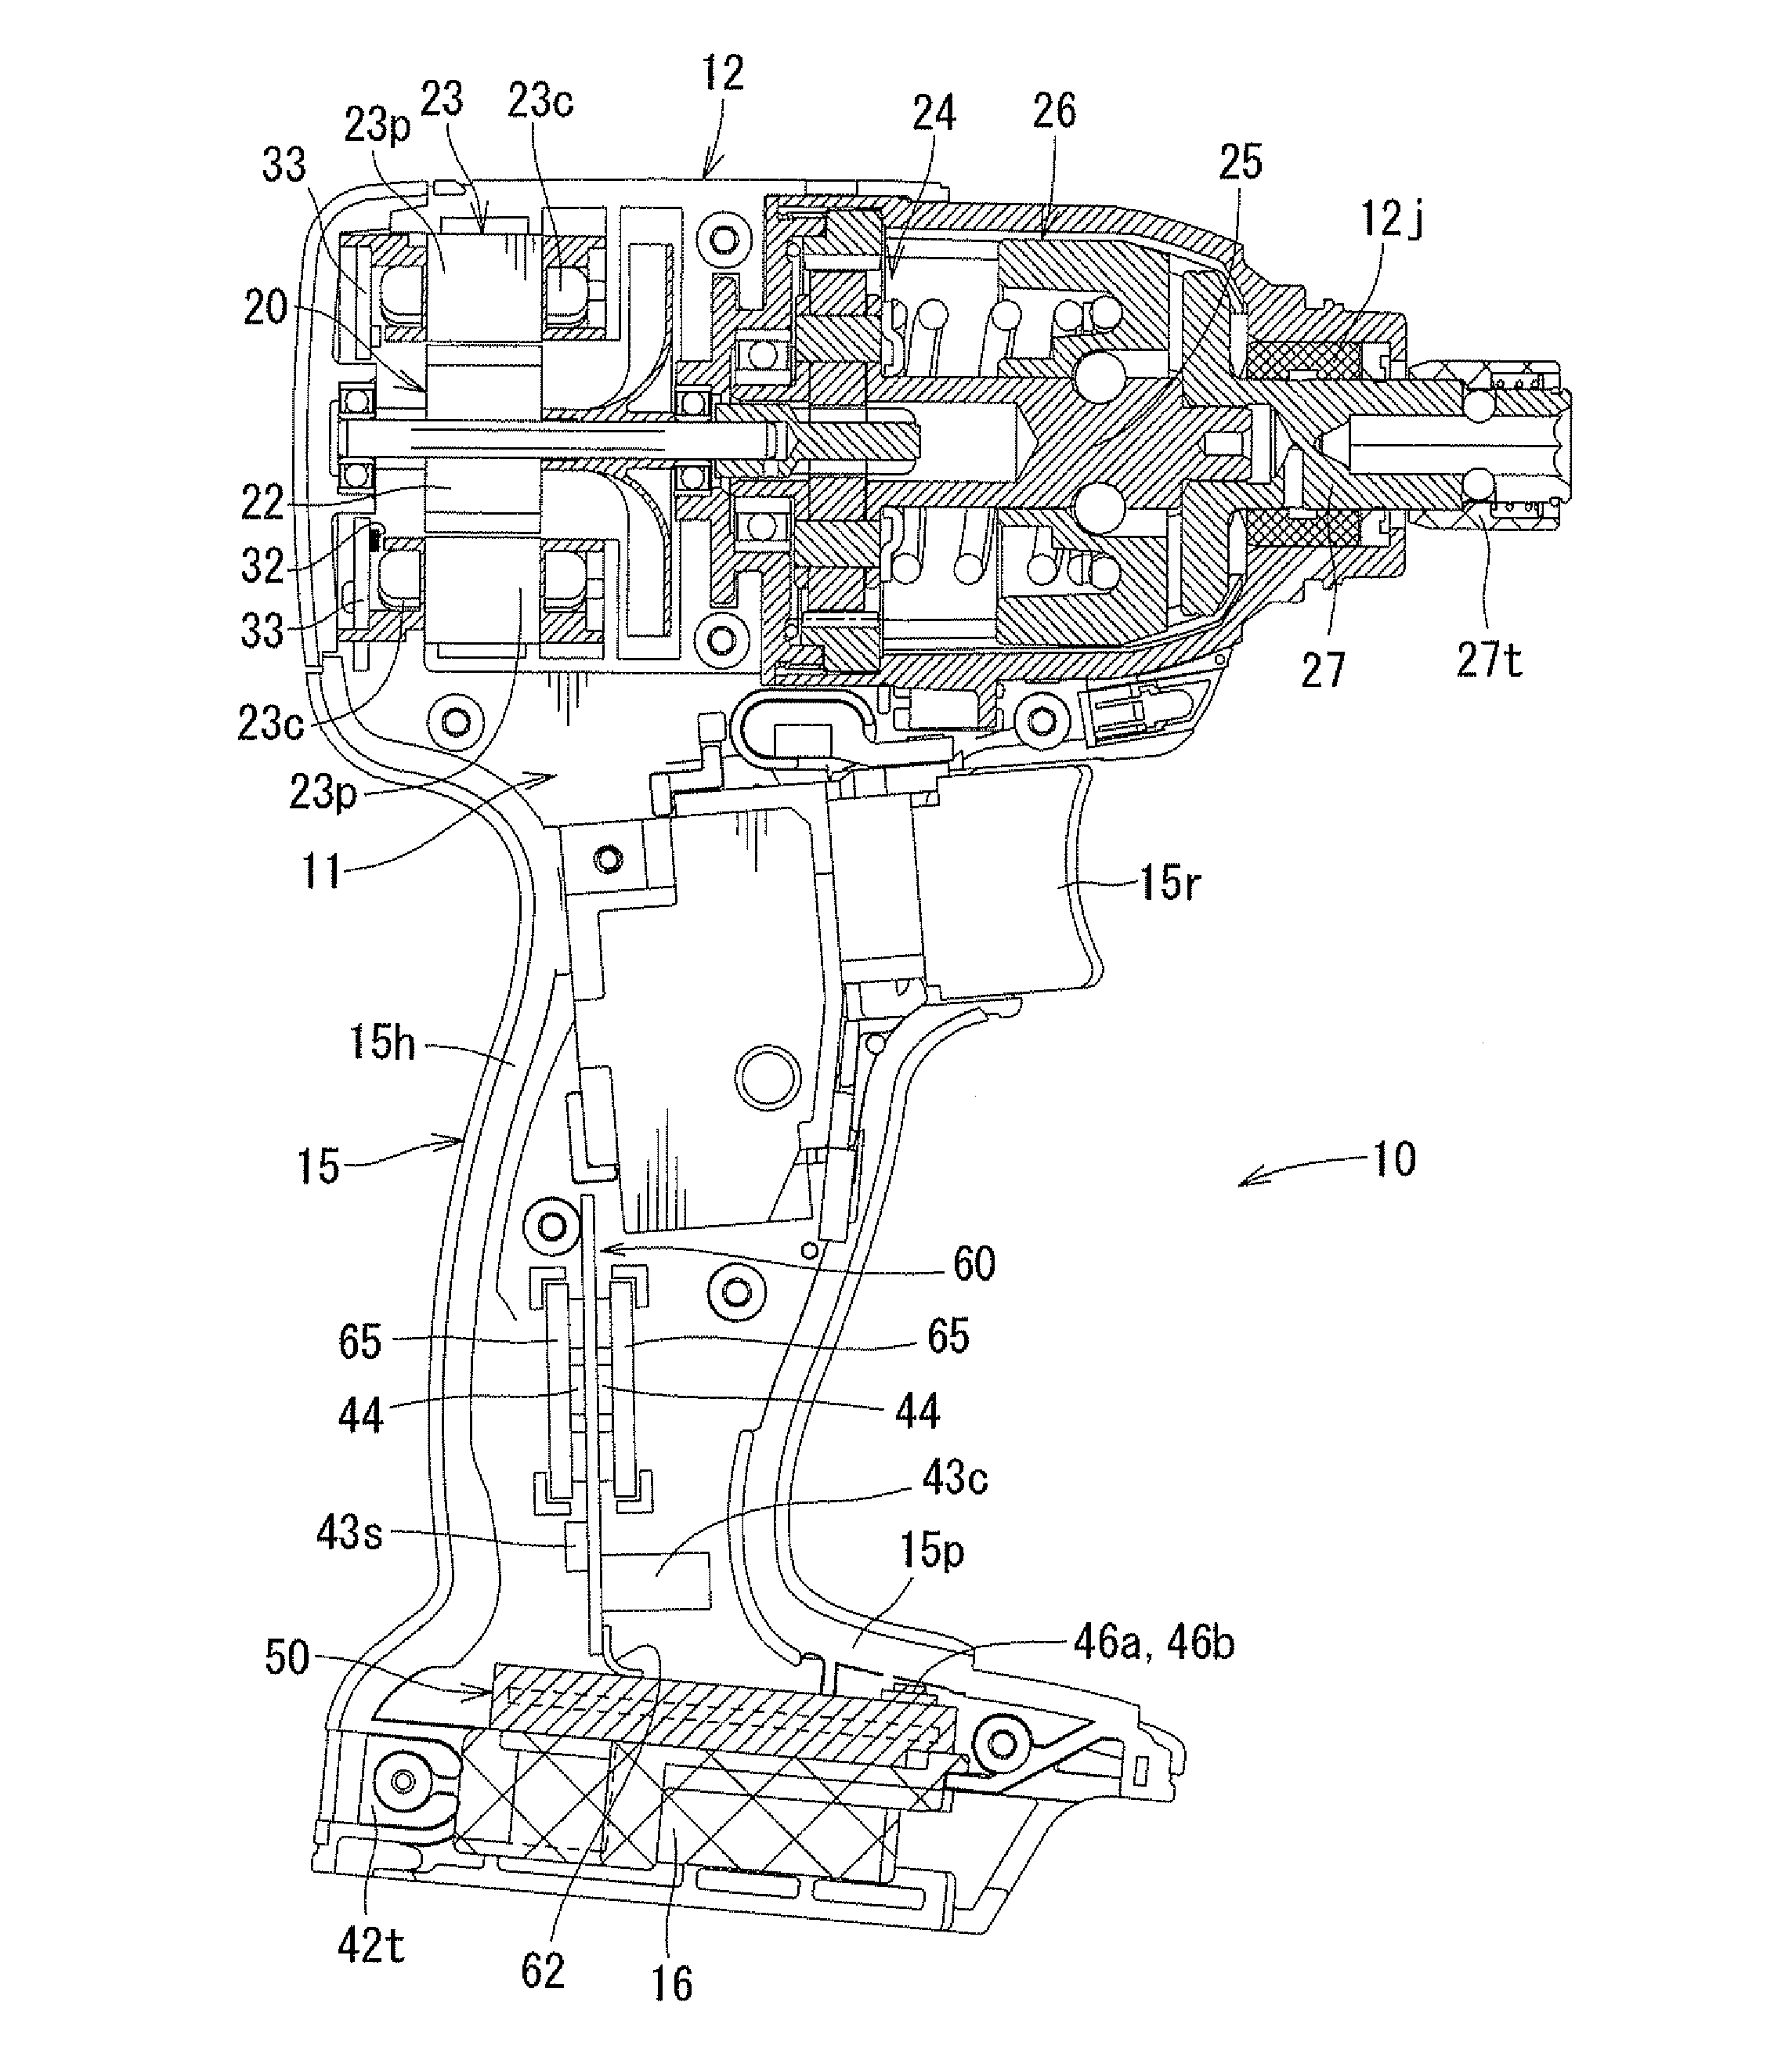 Electric power tool including a plurality of circuit boards